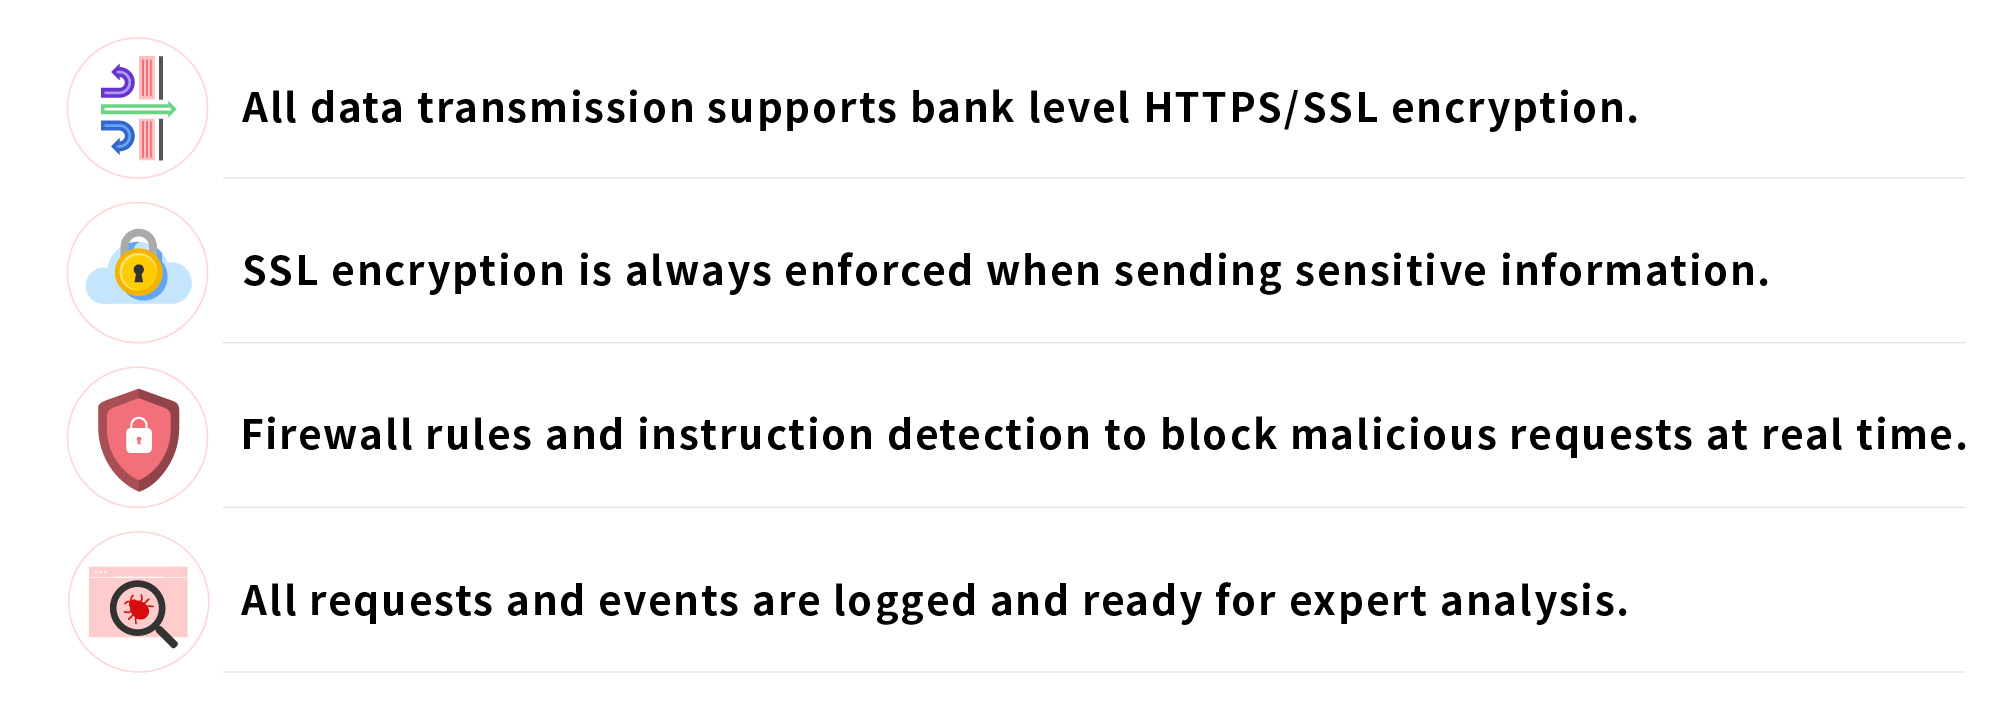 All data transmission supports bank level HTTPS/SSL encryption. SSL encryption is always enforced when sending sensitive information. Packets sent to servers will go through a series of strict firewall rules and application level intrusion detection and blocking program to stop malicious requests and IP at real time. All requests, system events, application events, database events are logged and ready for expert analysis.